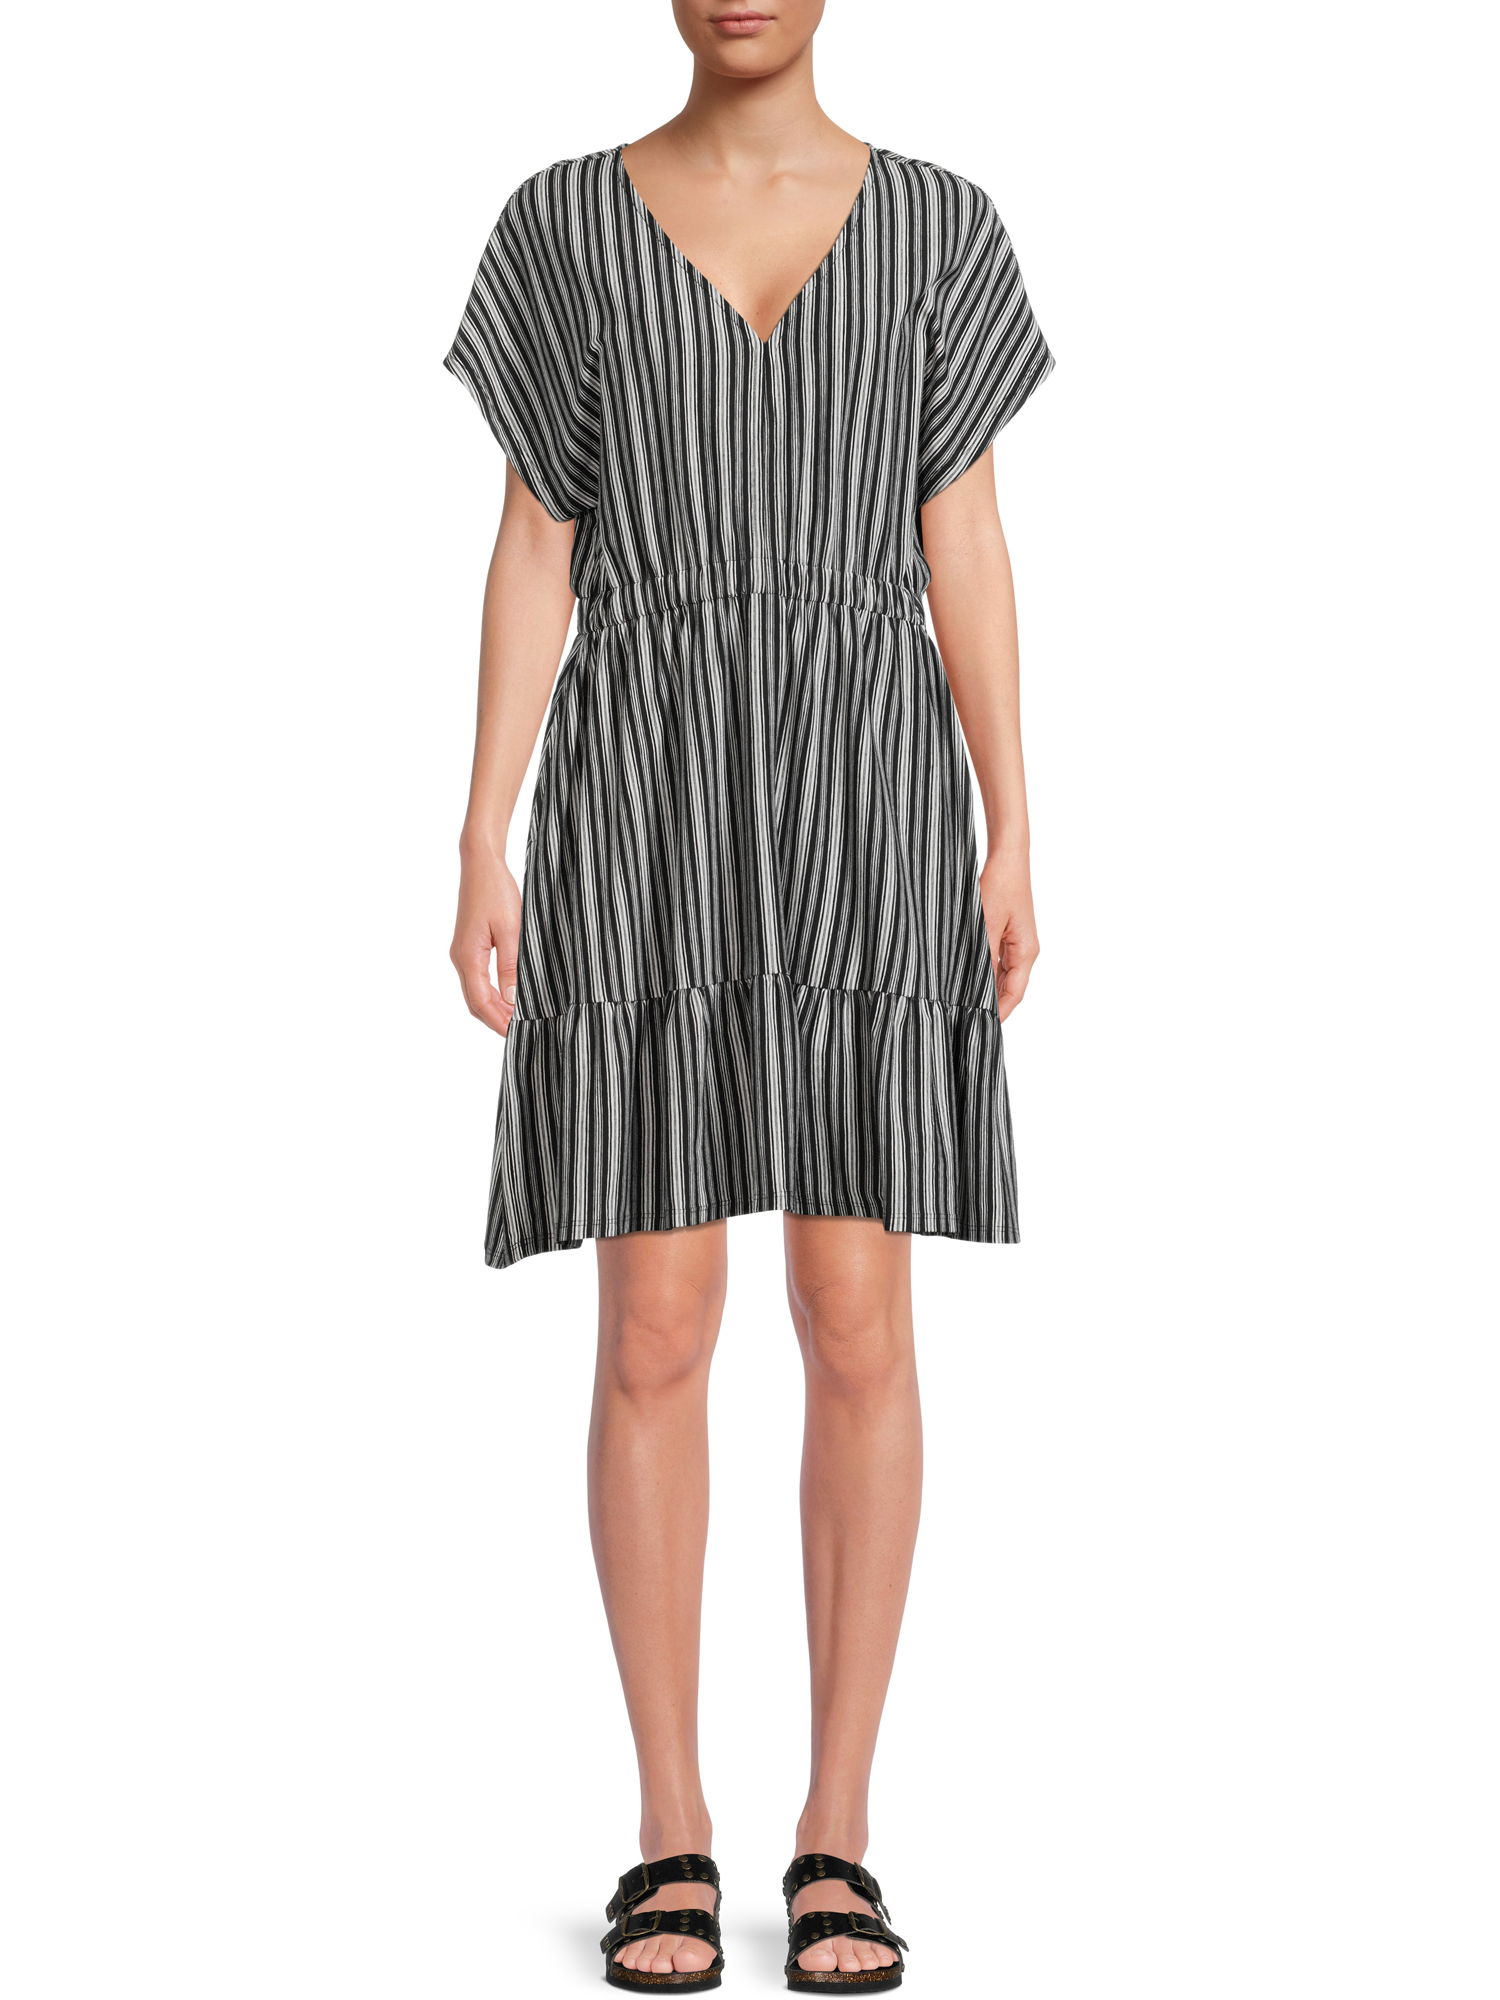 Time and Tru Women's V-Neck Printed Knit Dress - image 1 of 5